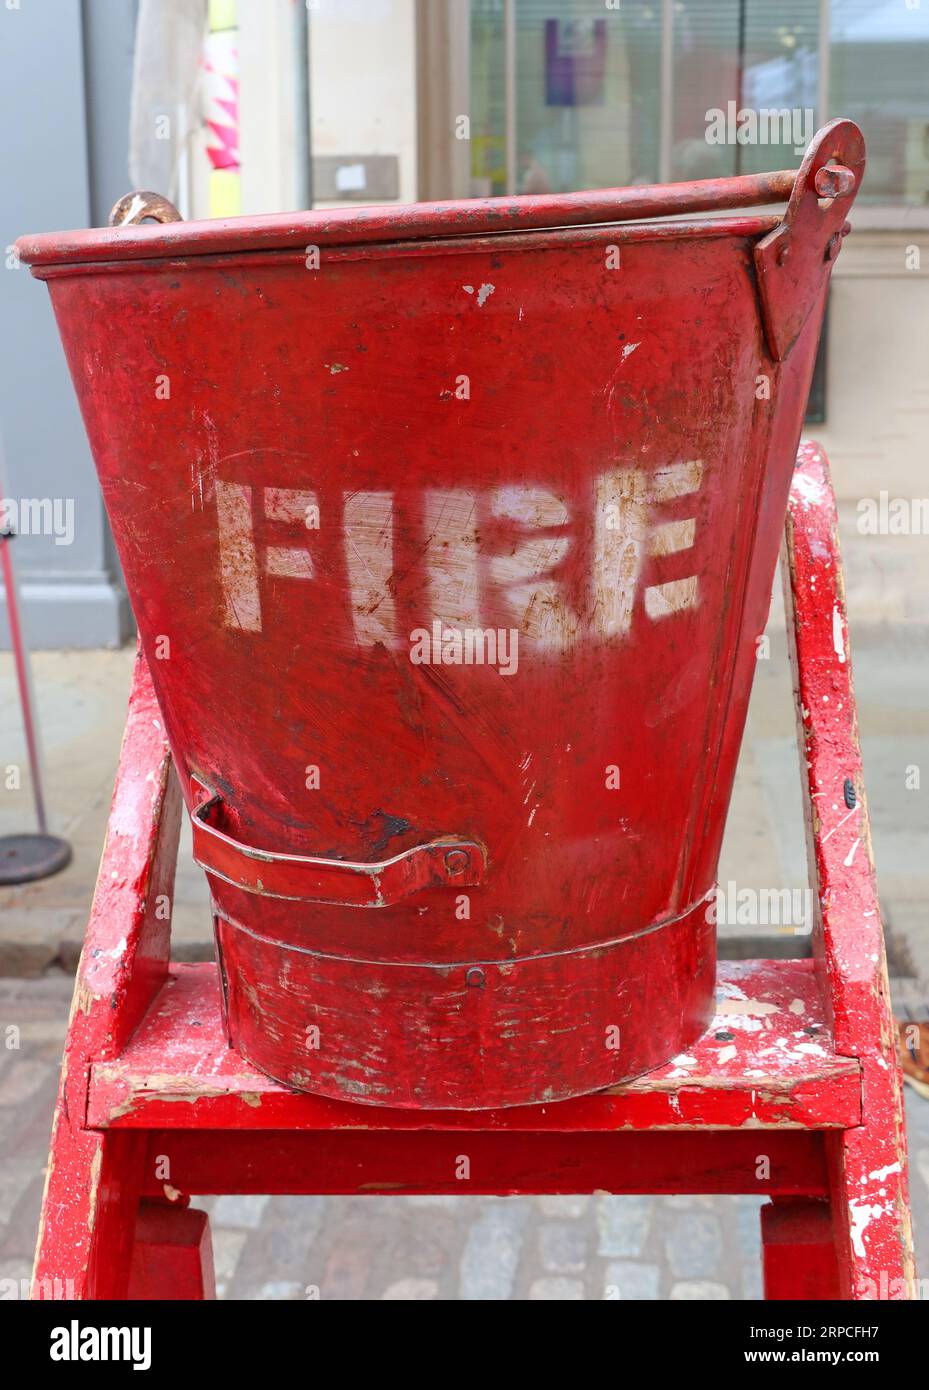 Antique red fire bucket, on sale at Sunday flea market, Guildford, Surrey, England, UK Stock Photo